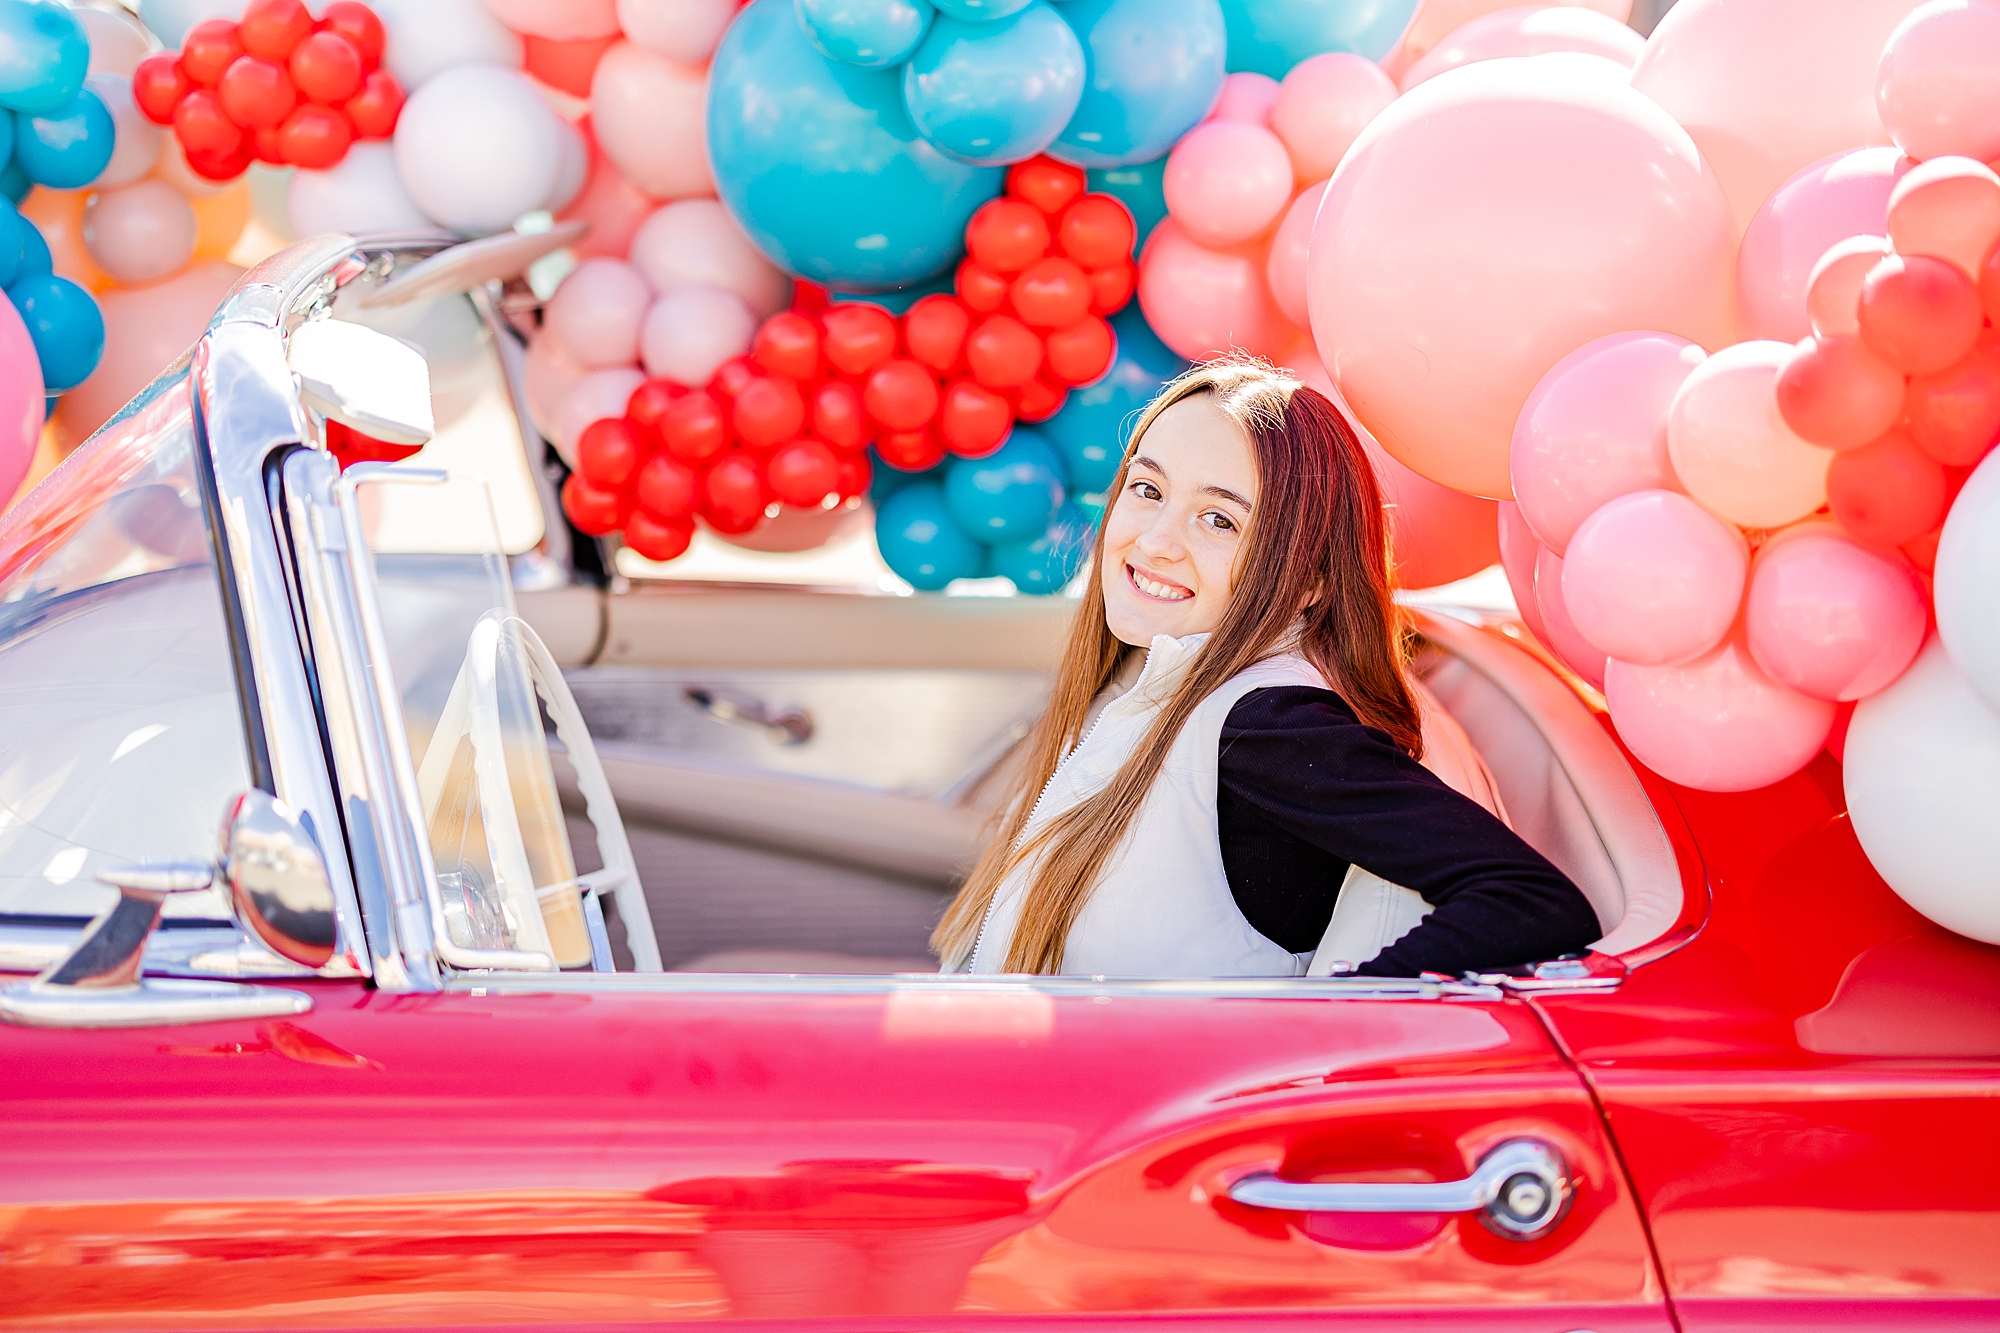 woman sits in red Thunderbird during Valentine’s Day photos